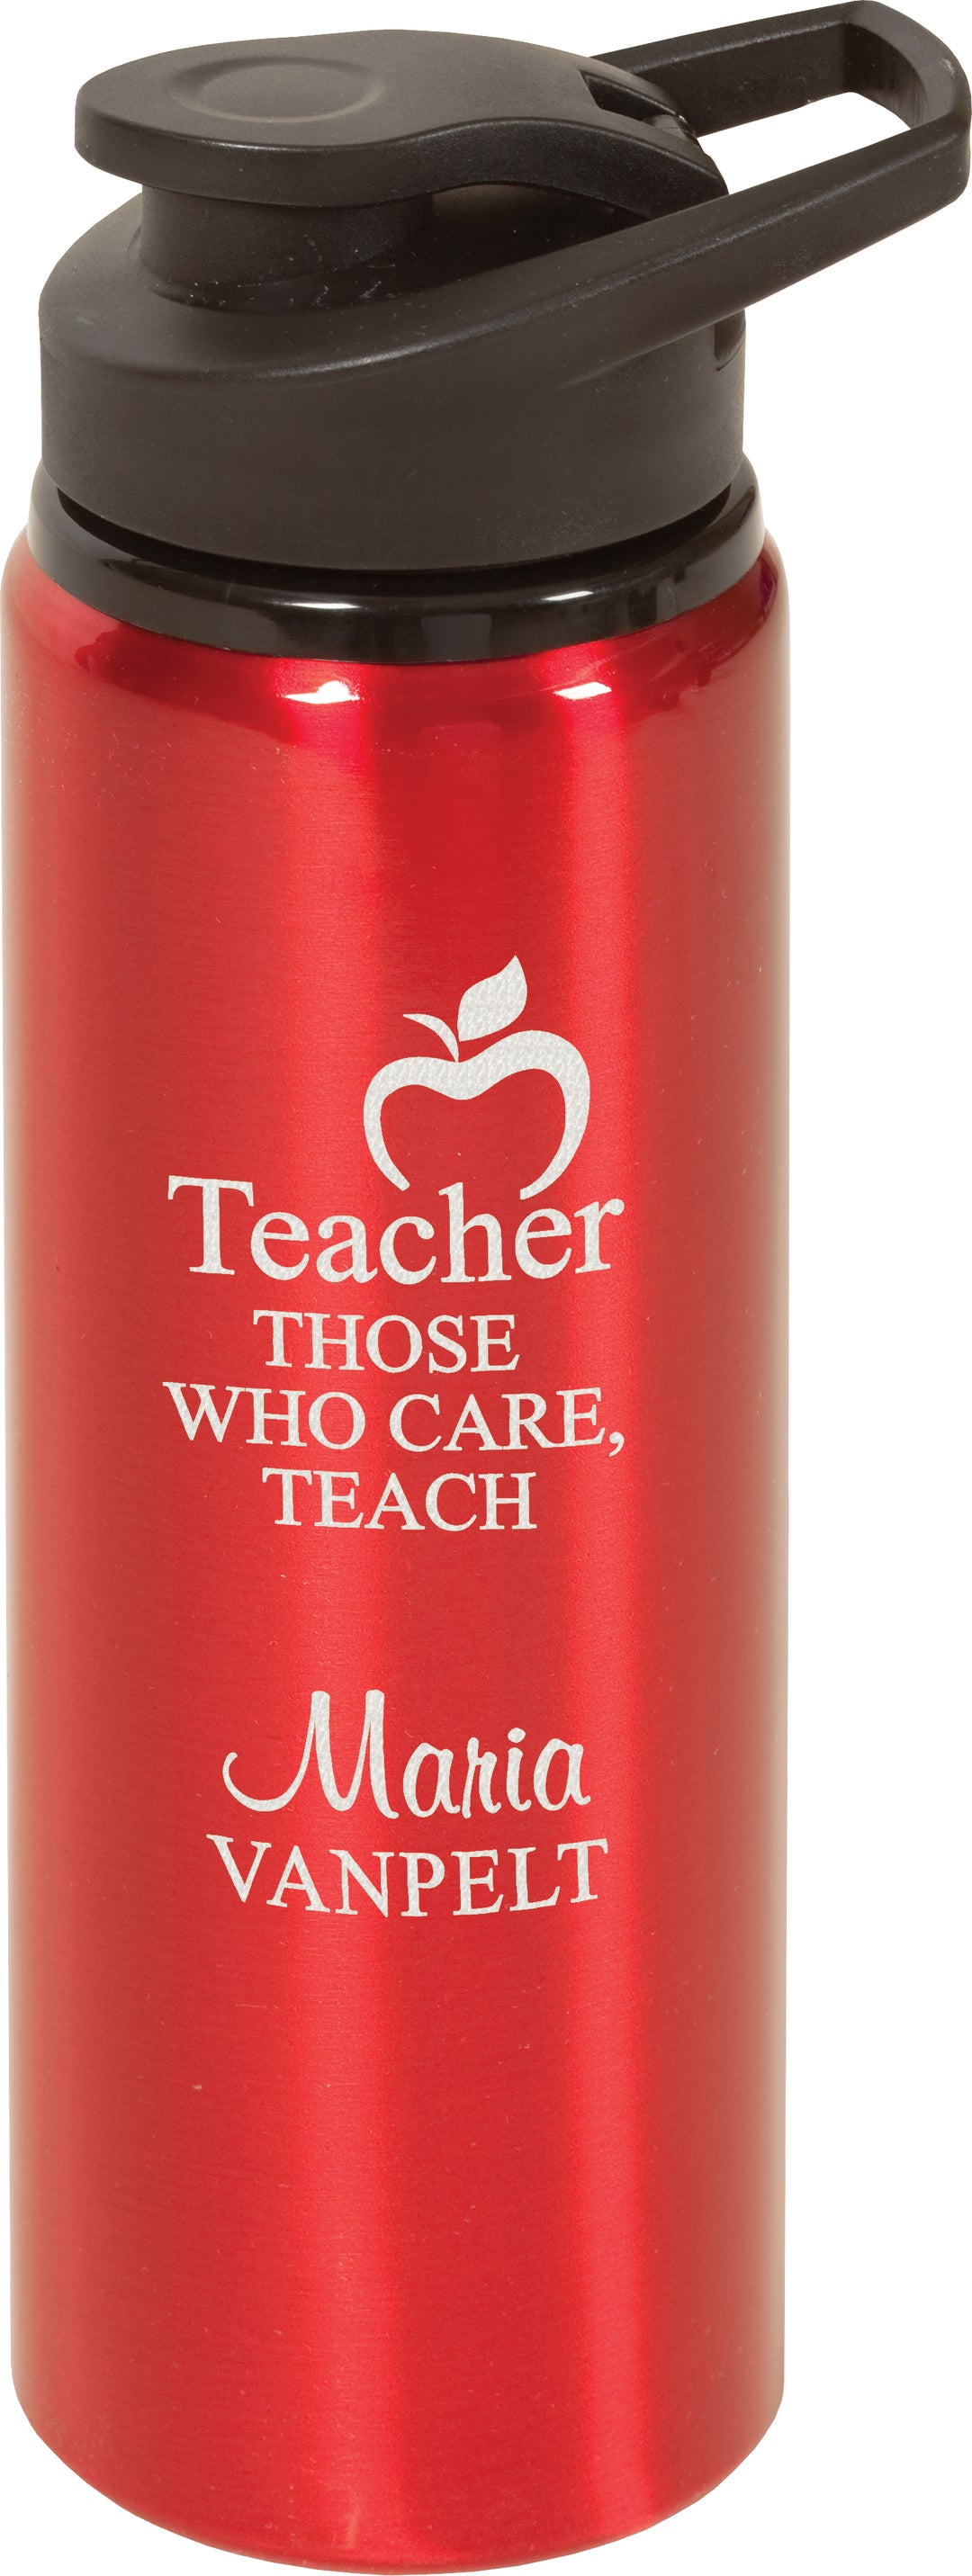 Personalized Red Water Bottle 26 oz.